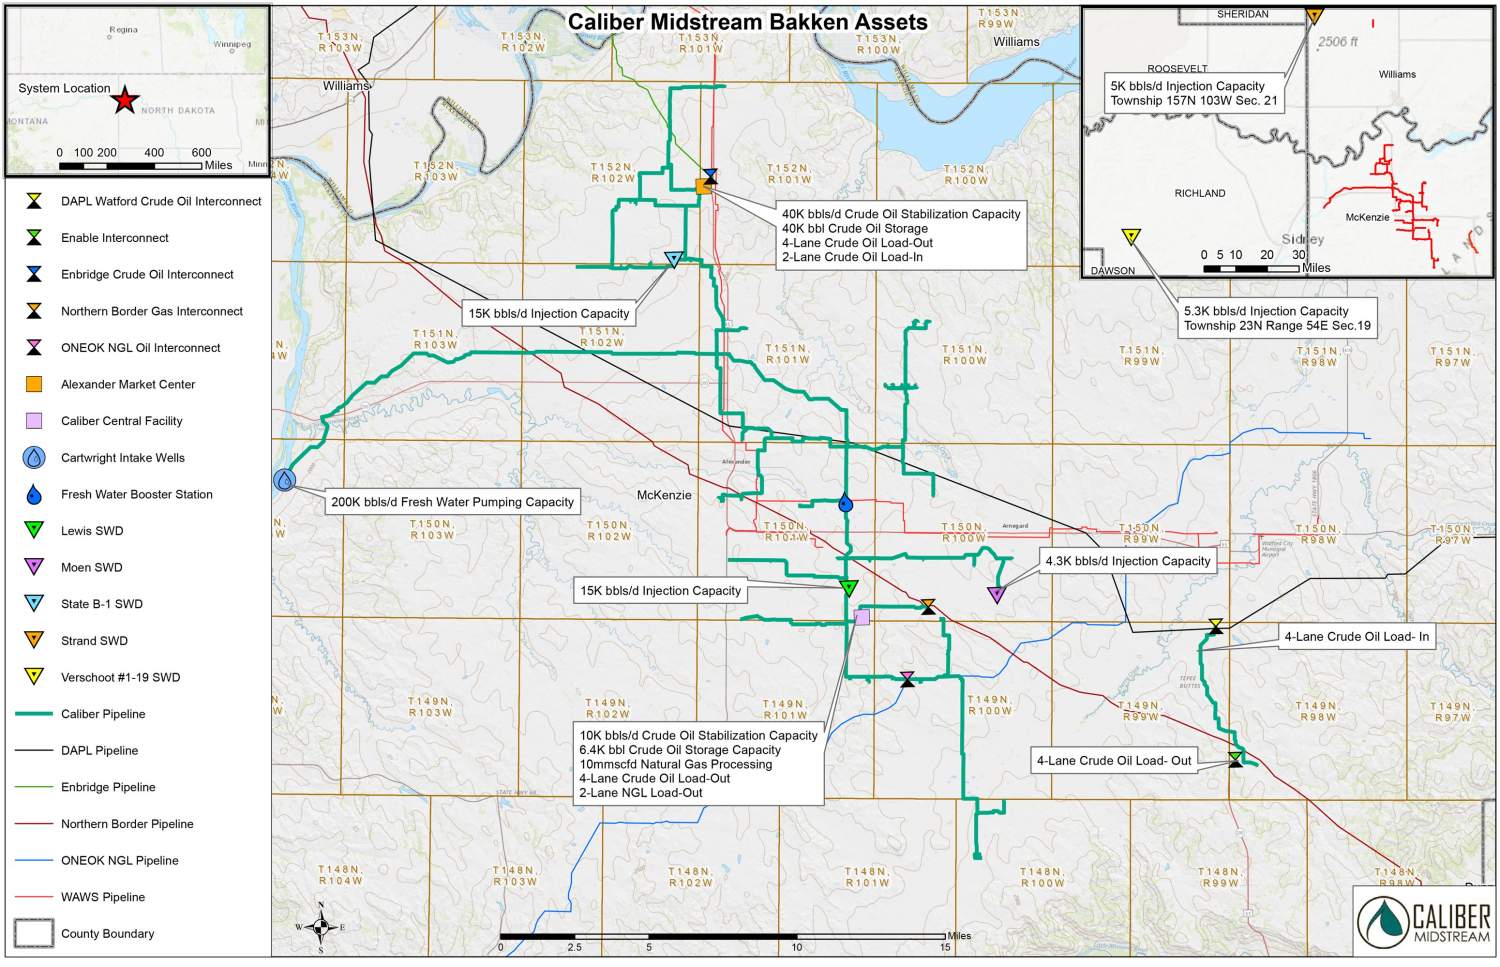 A map of Caliber Midstream’s asset base in the Bakken and Three Forks shale plays in McKenzie County, N.D. The map does not include recent expansion. (Source: Caliber Midstream Holdings LP)